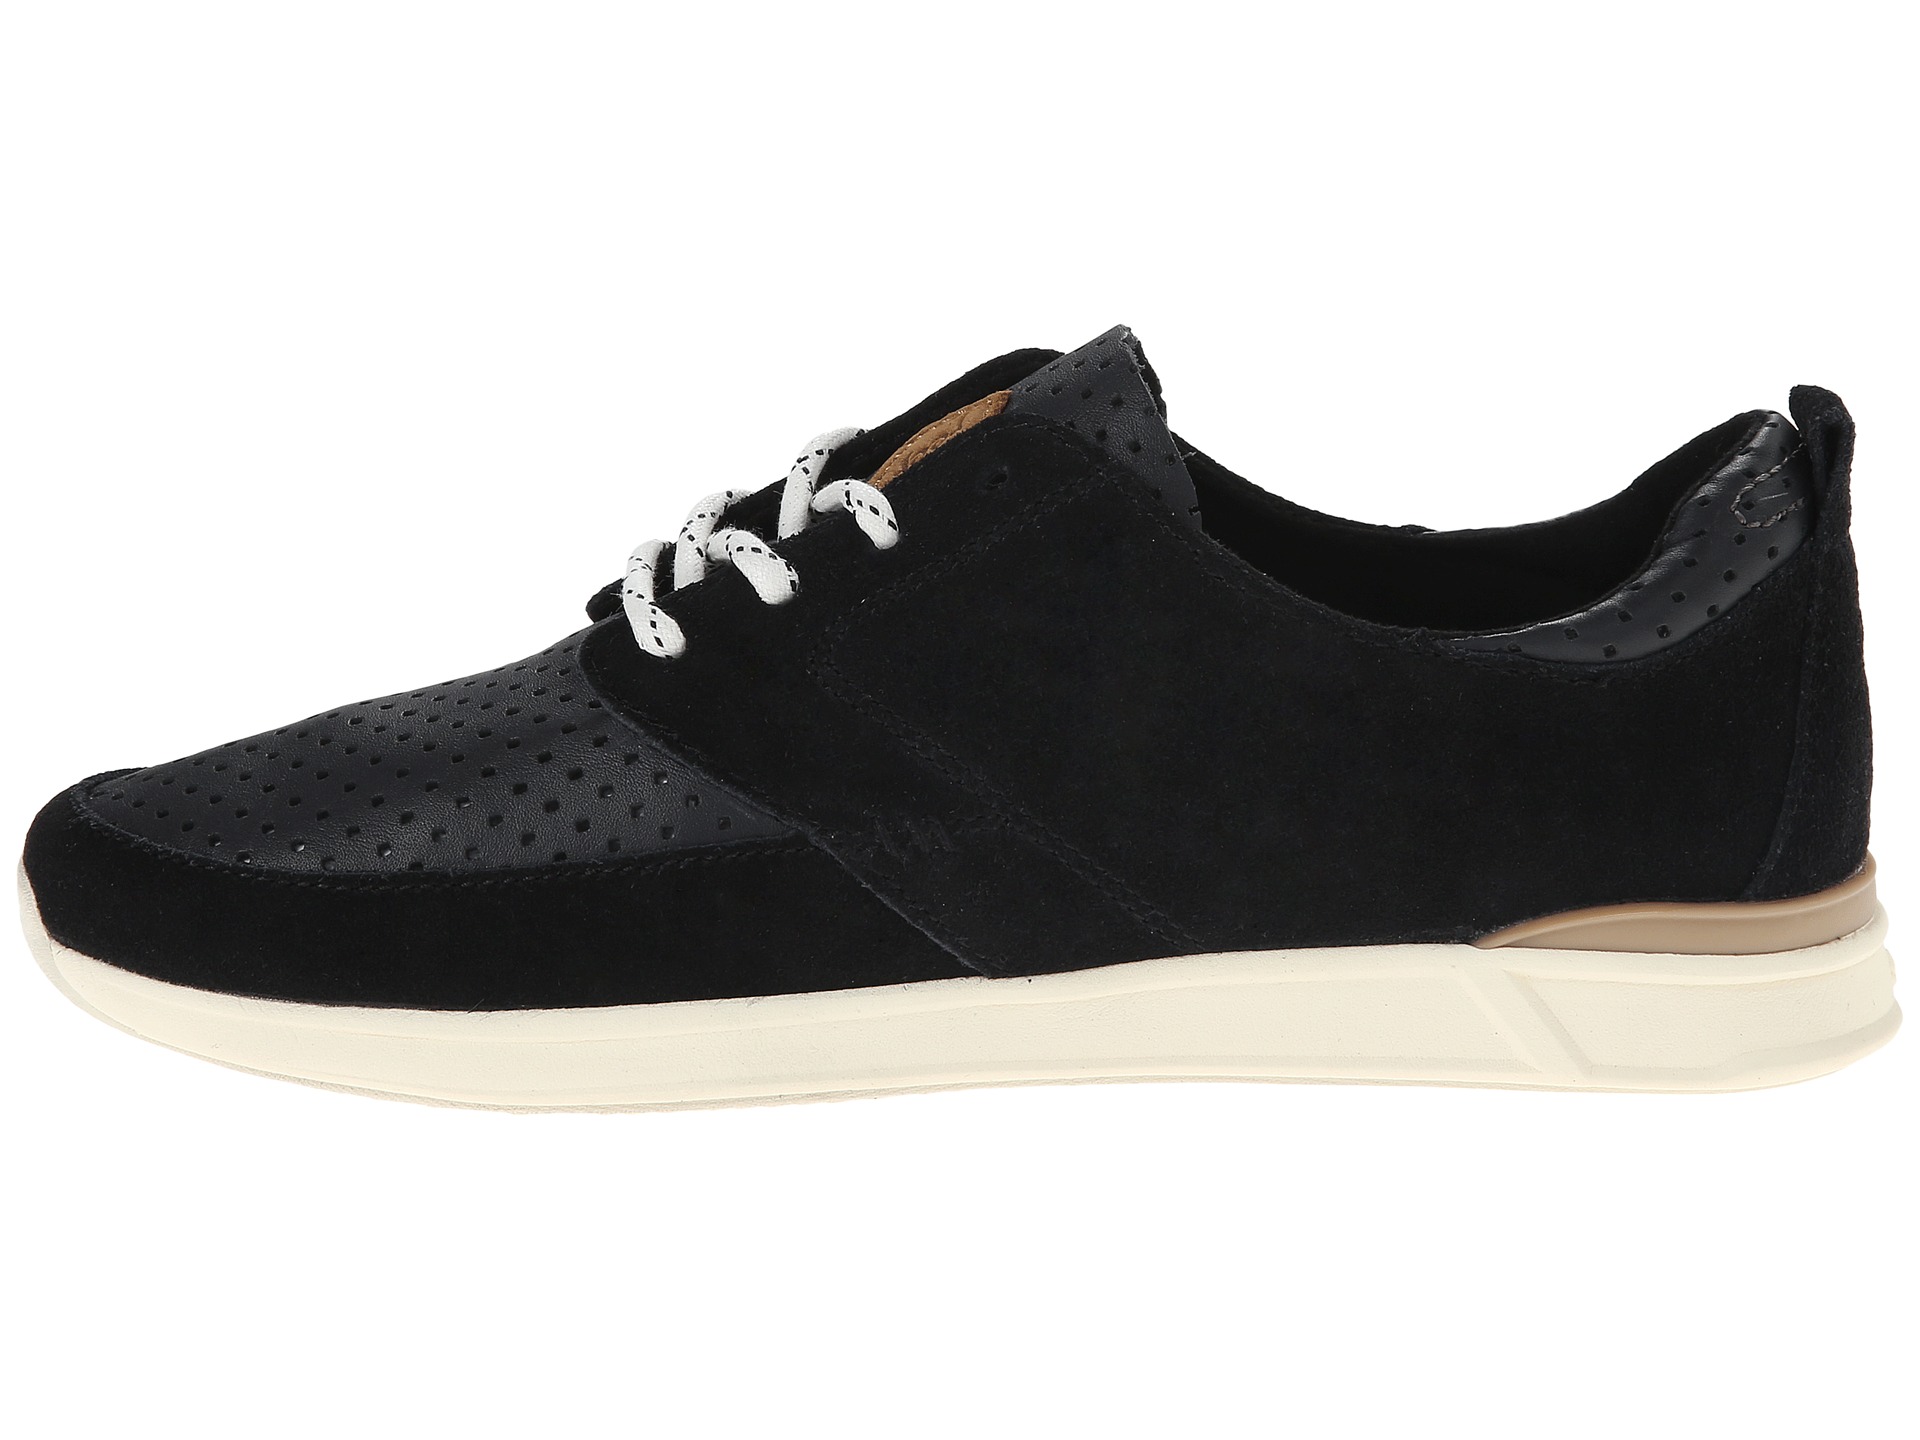 Reef Rover Low LX at Zappos.com